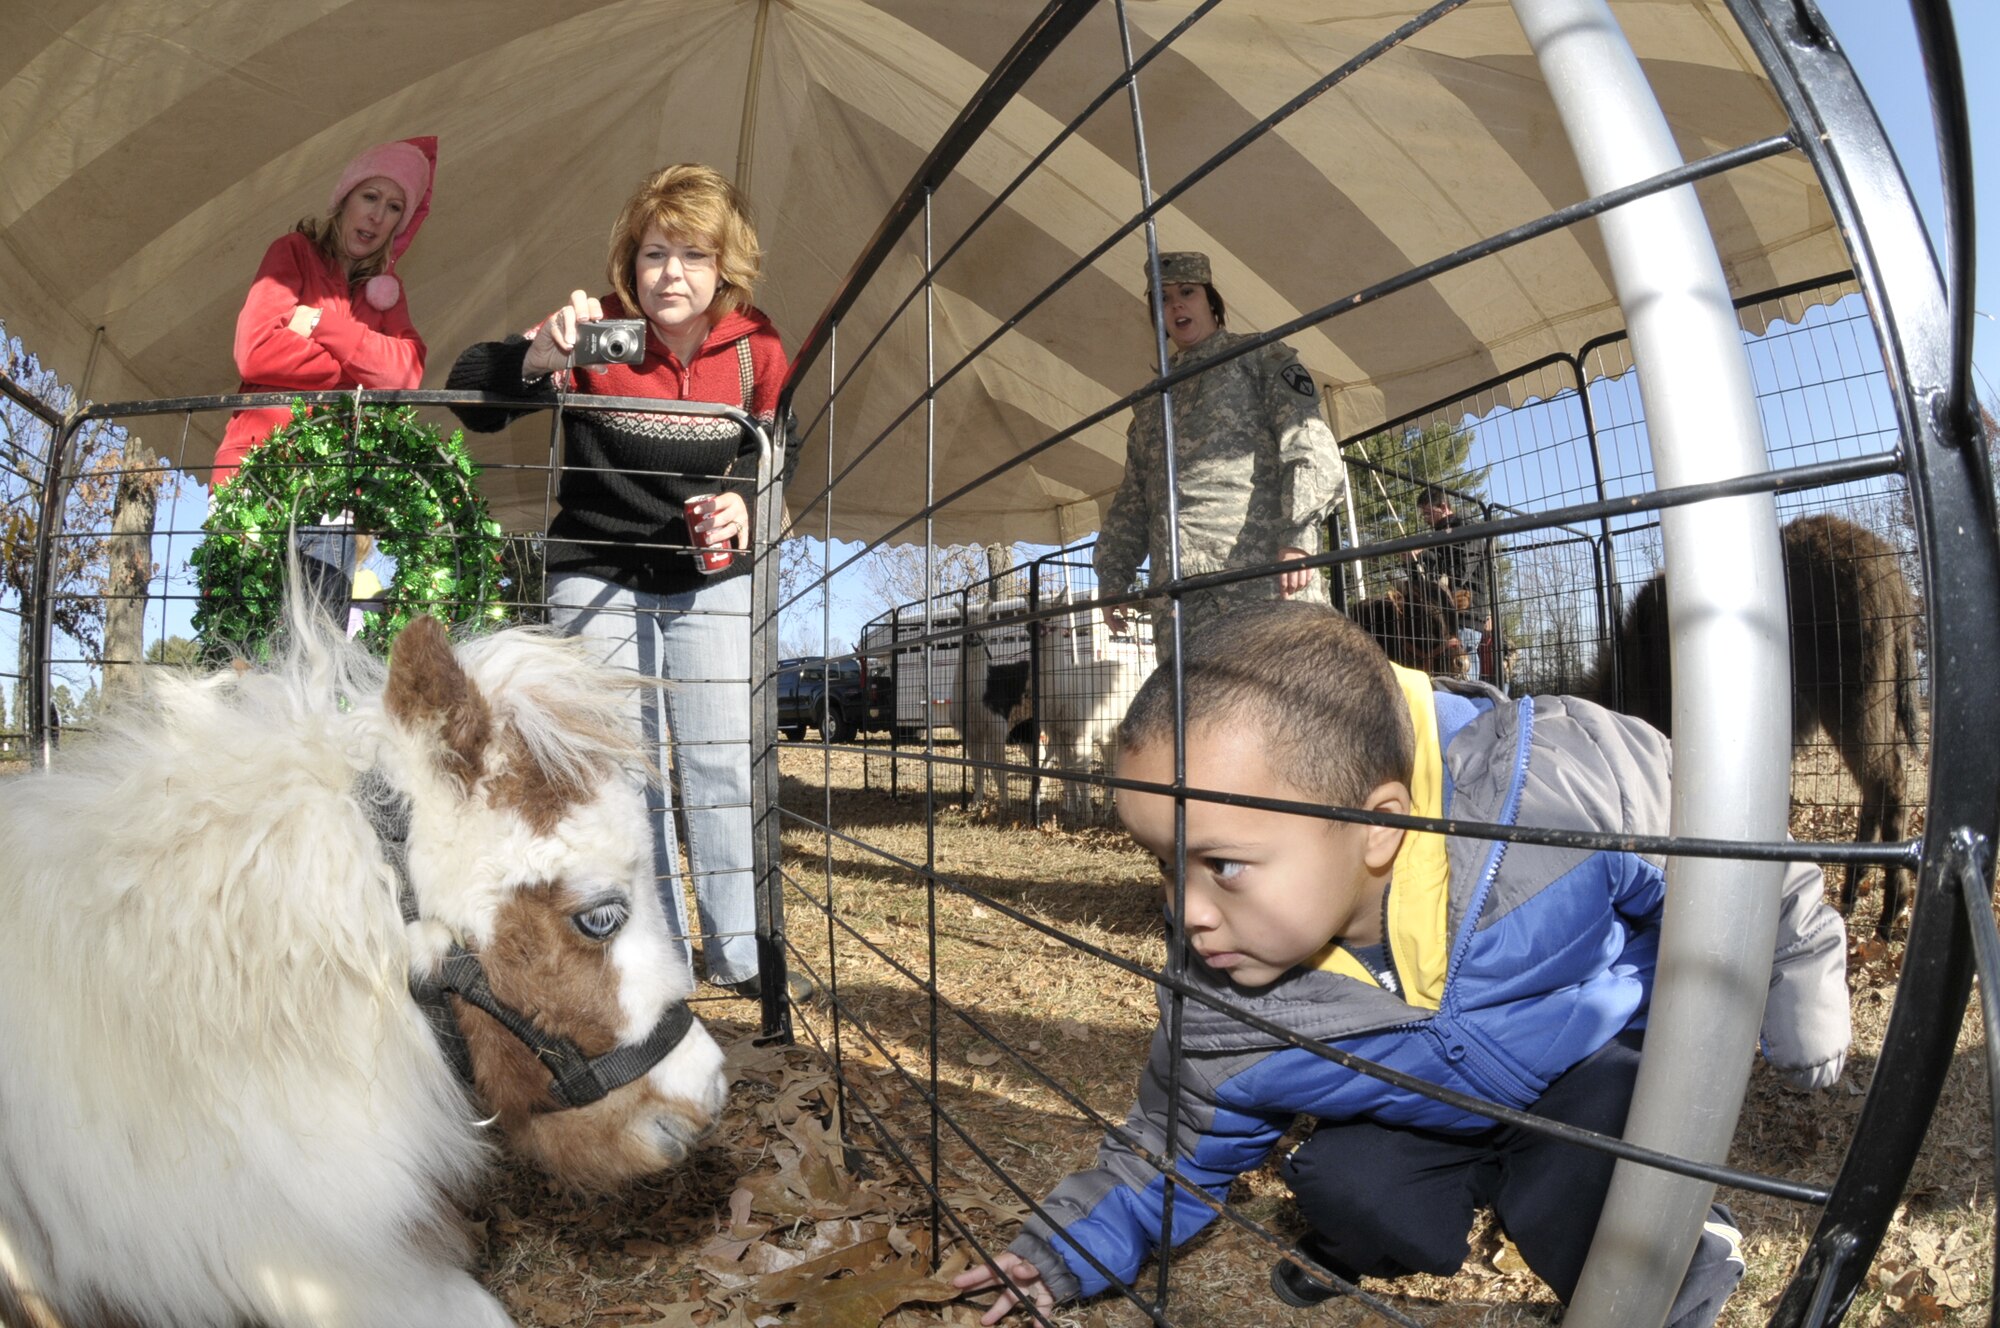 This little boy tries to make a friend in the petting zoo area at the annual Children’s Christmas Party at the Arnold Lakeside Club Dec. 7. (Photo by Rick Goodriend)